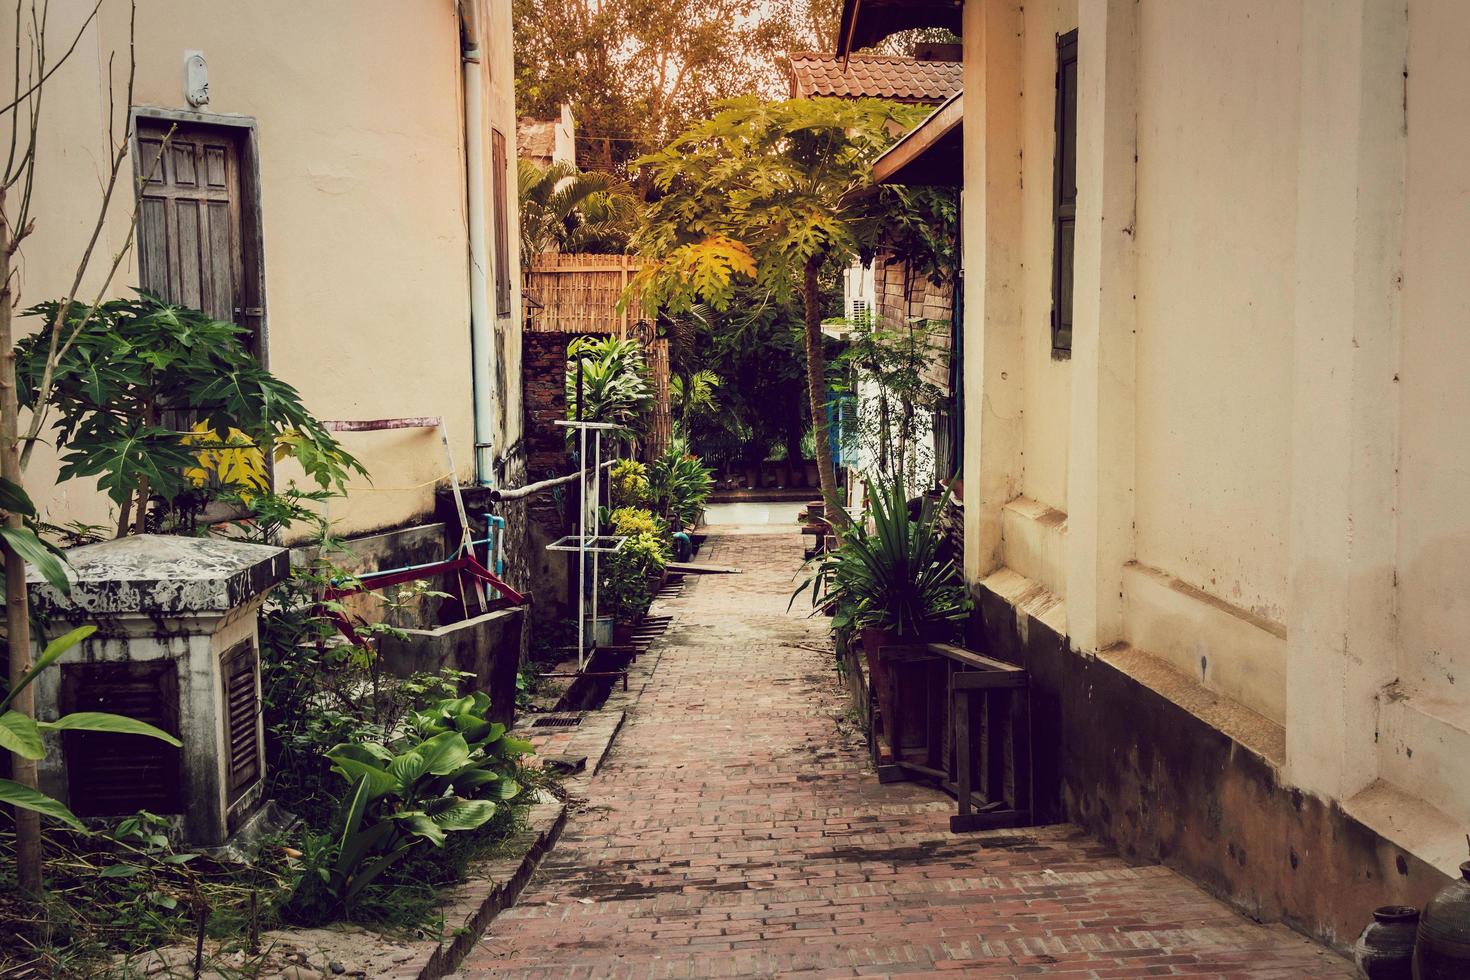 Alley with sunlight in Luang prabang, Laos. photo